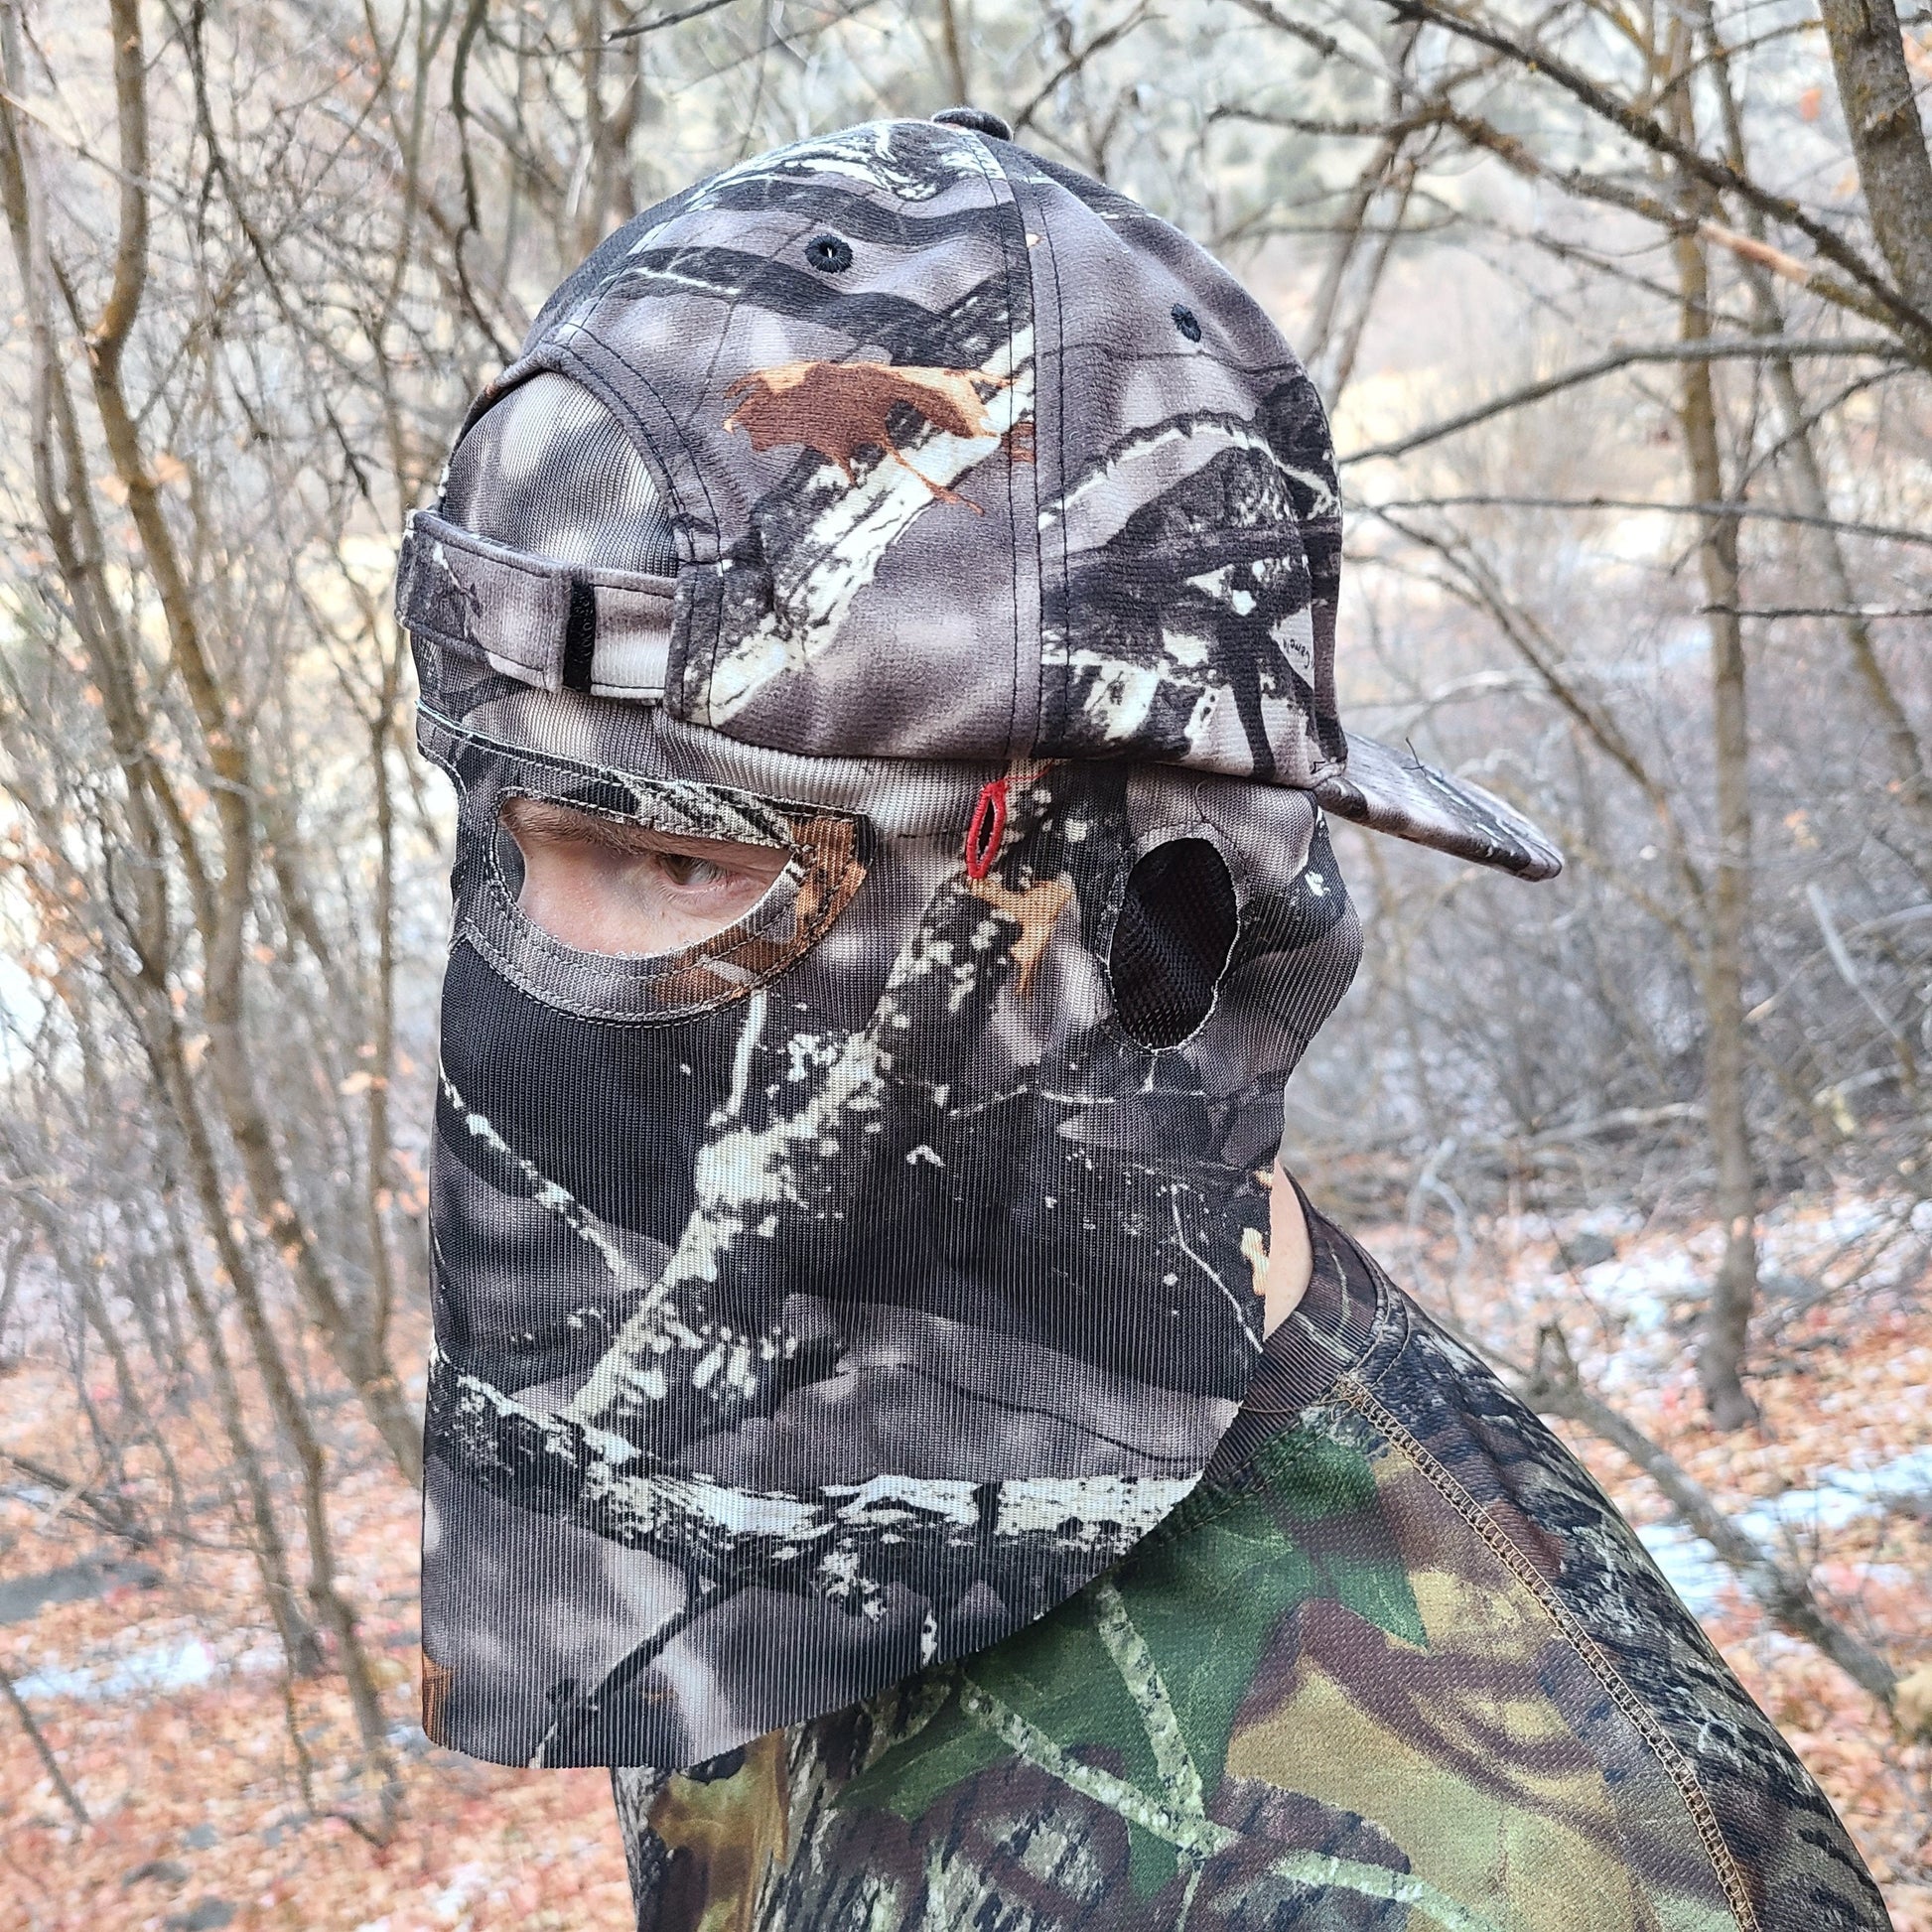 Man Wearing a QuikCamo Mathews Lost Camo Hat Backwards with Face Mask. There is a forest or woods in the background